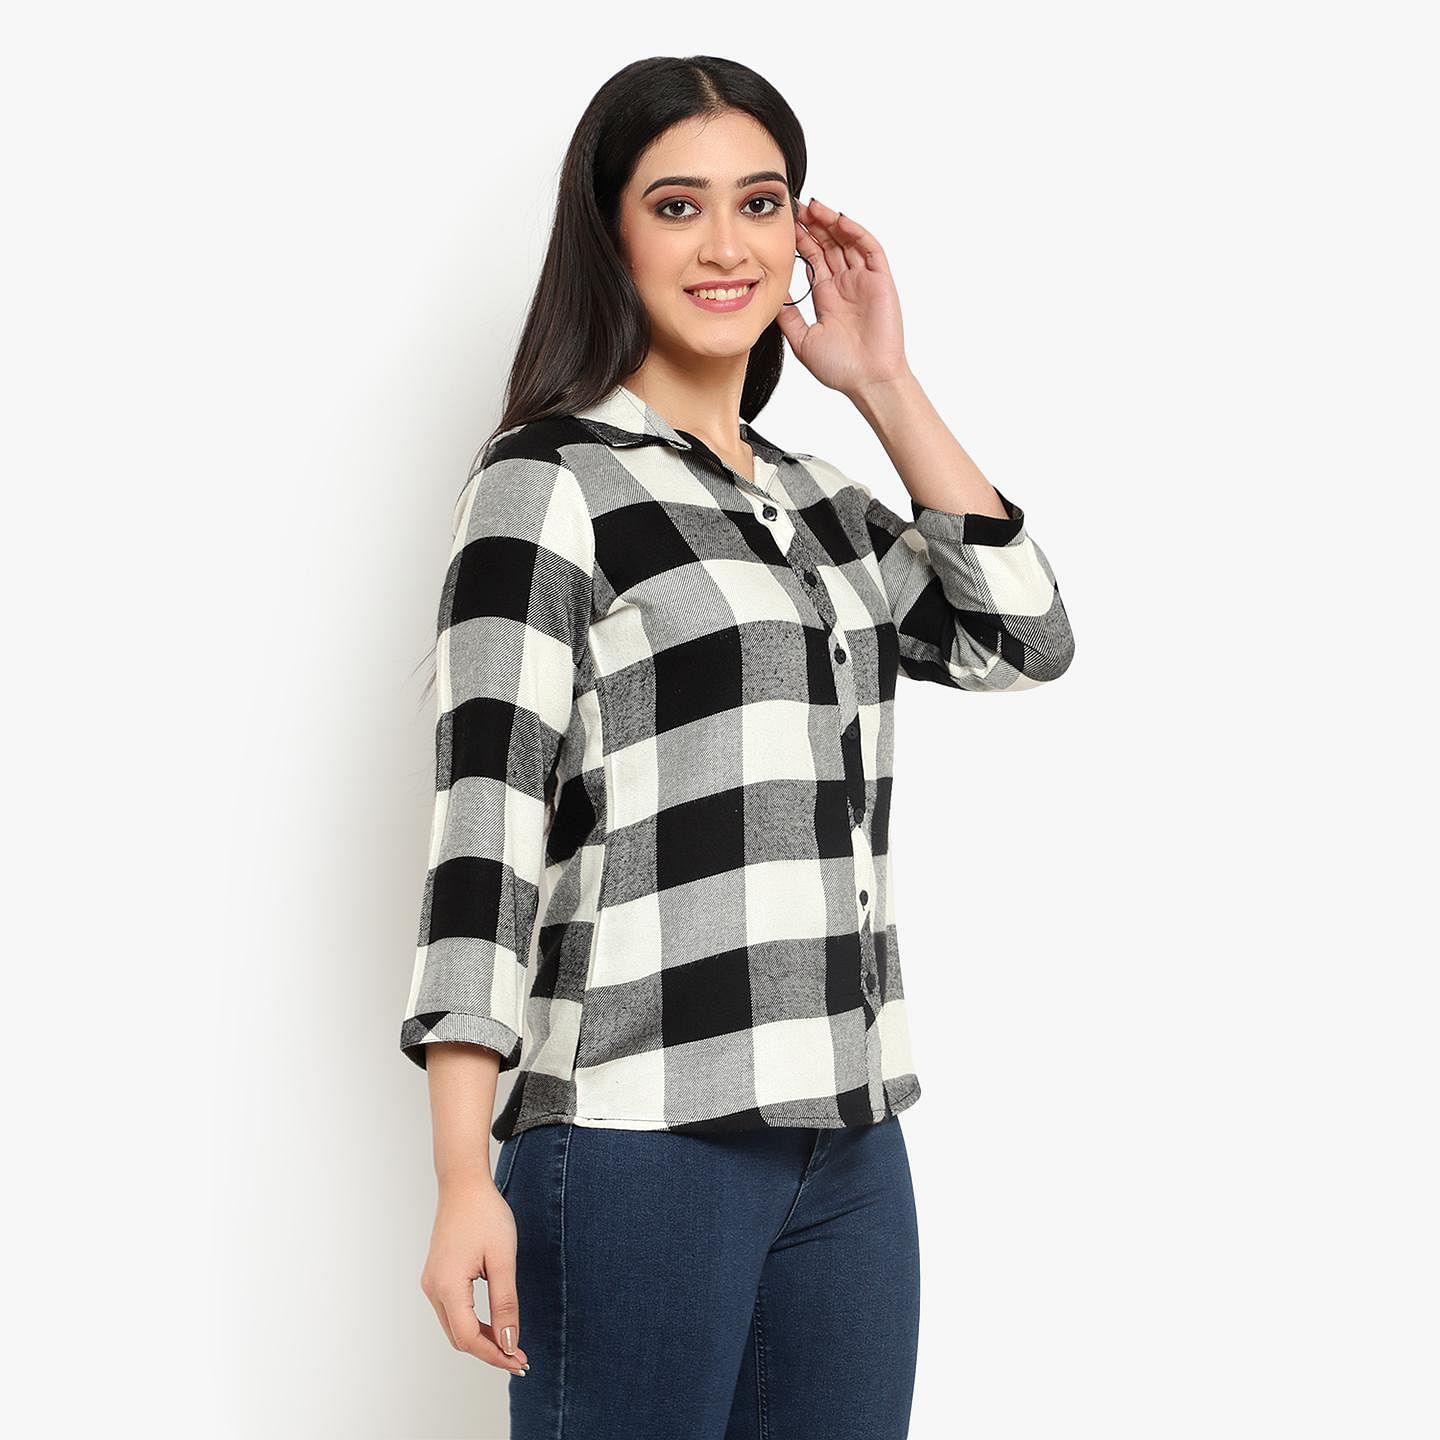 Ayaany - Black Colored Casual Cotton Shirt - Peachmode